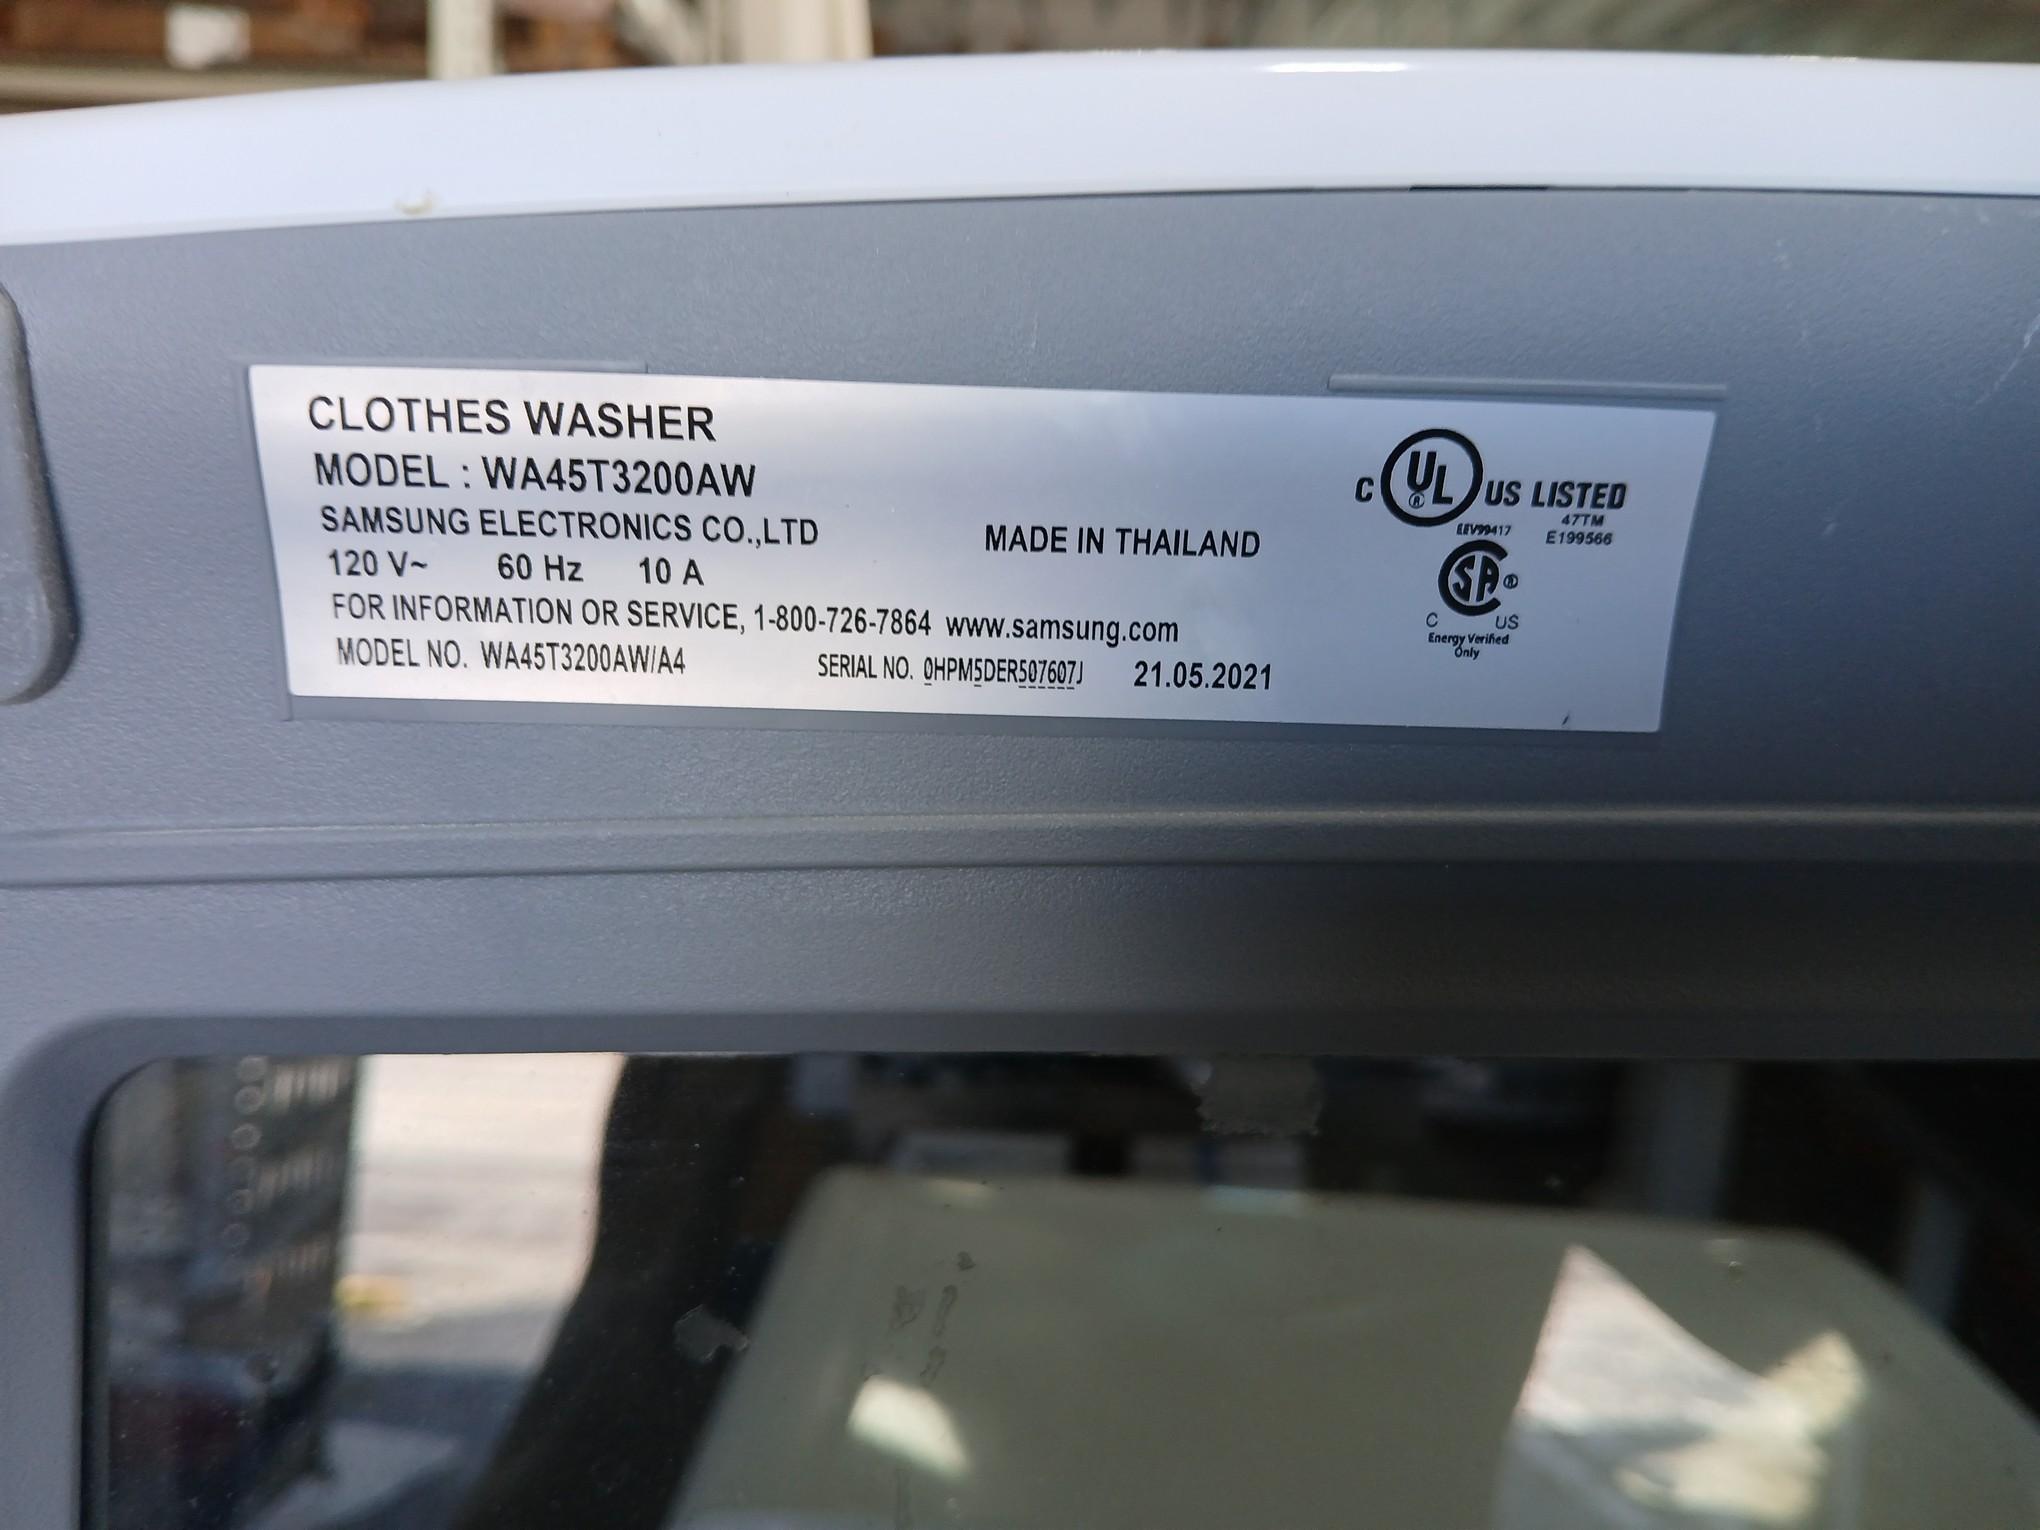 SAMSUNG Model # WA45T3200AW Residential Washing Machine / Samsung Cloths Washer - The specs to this